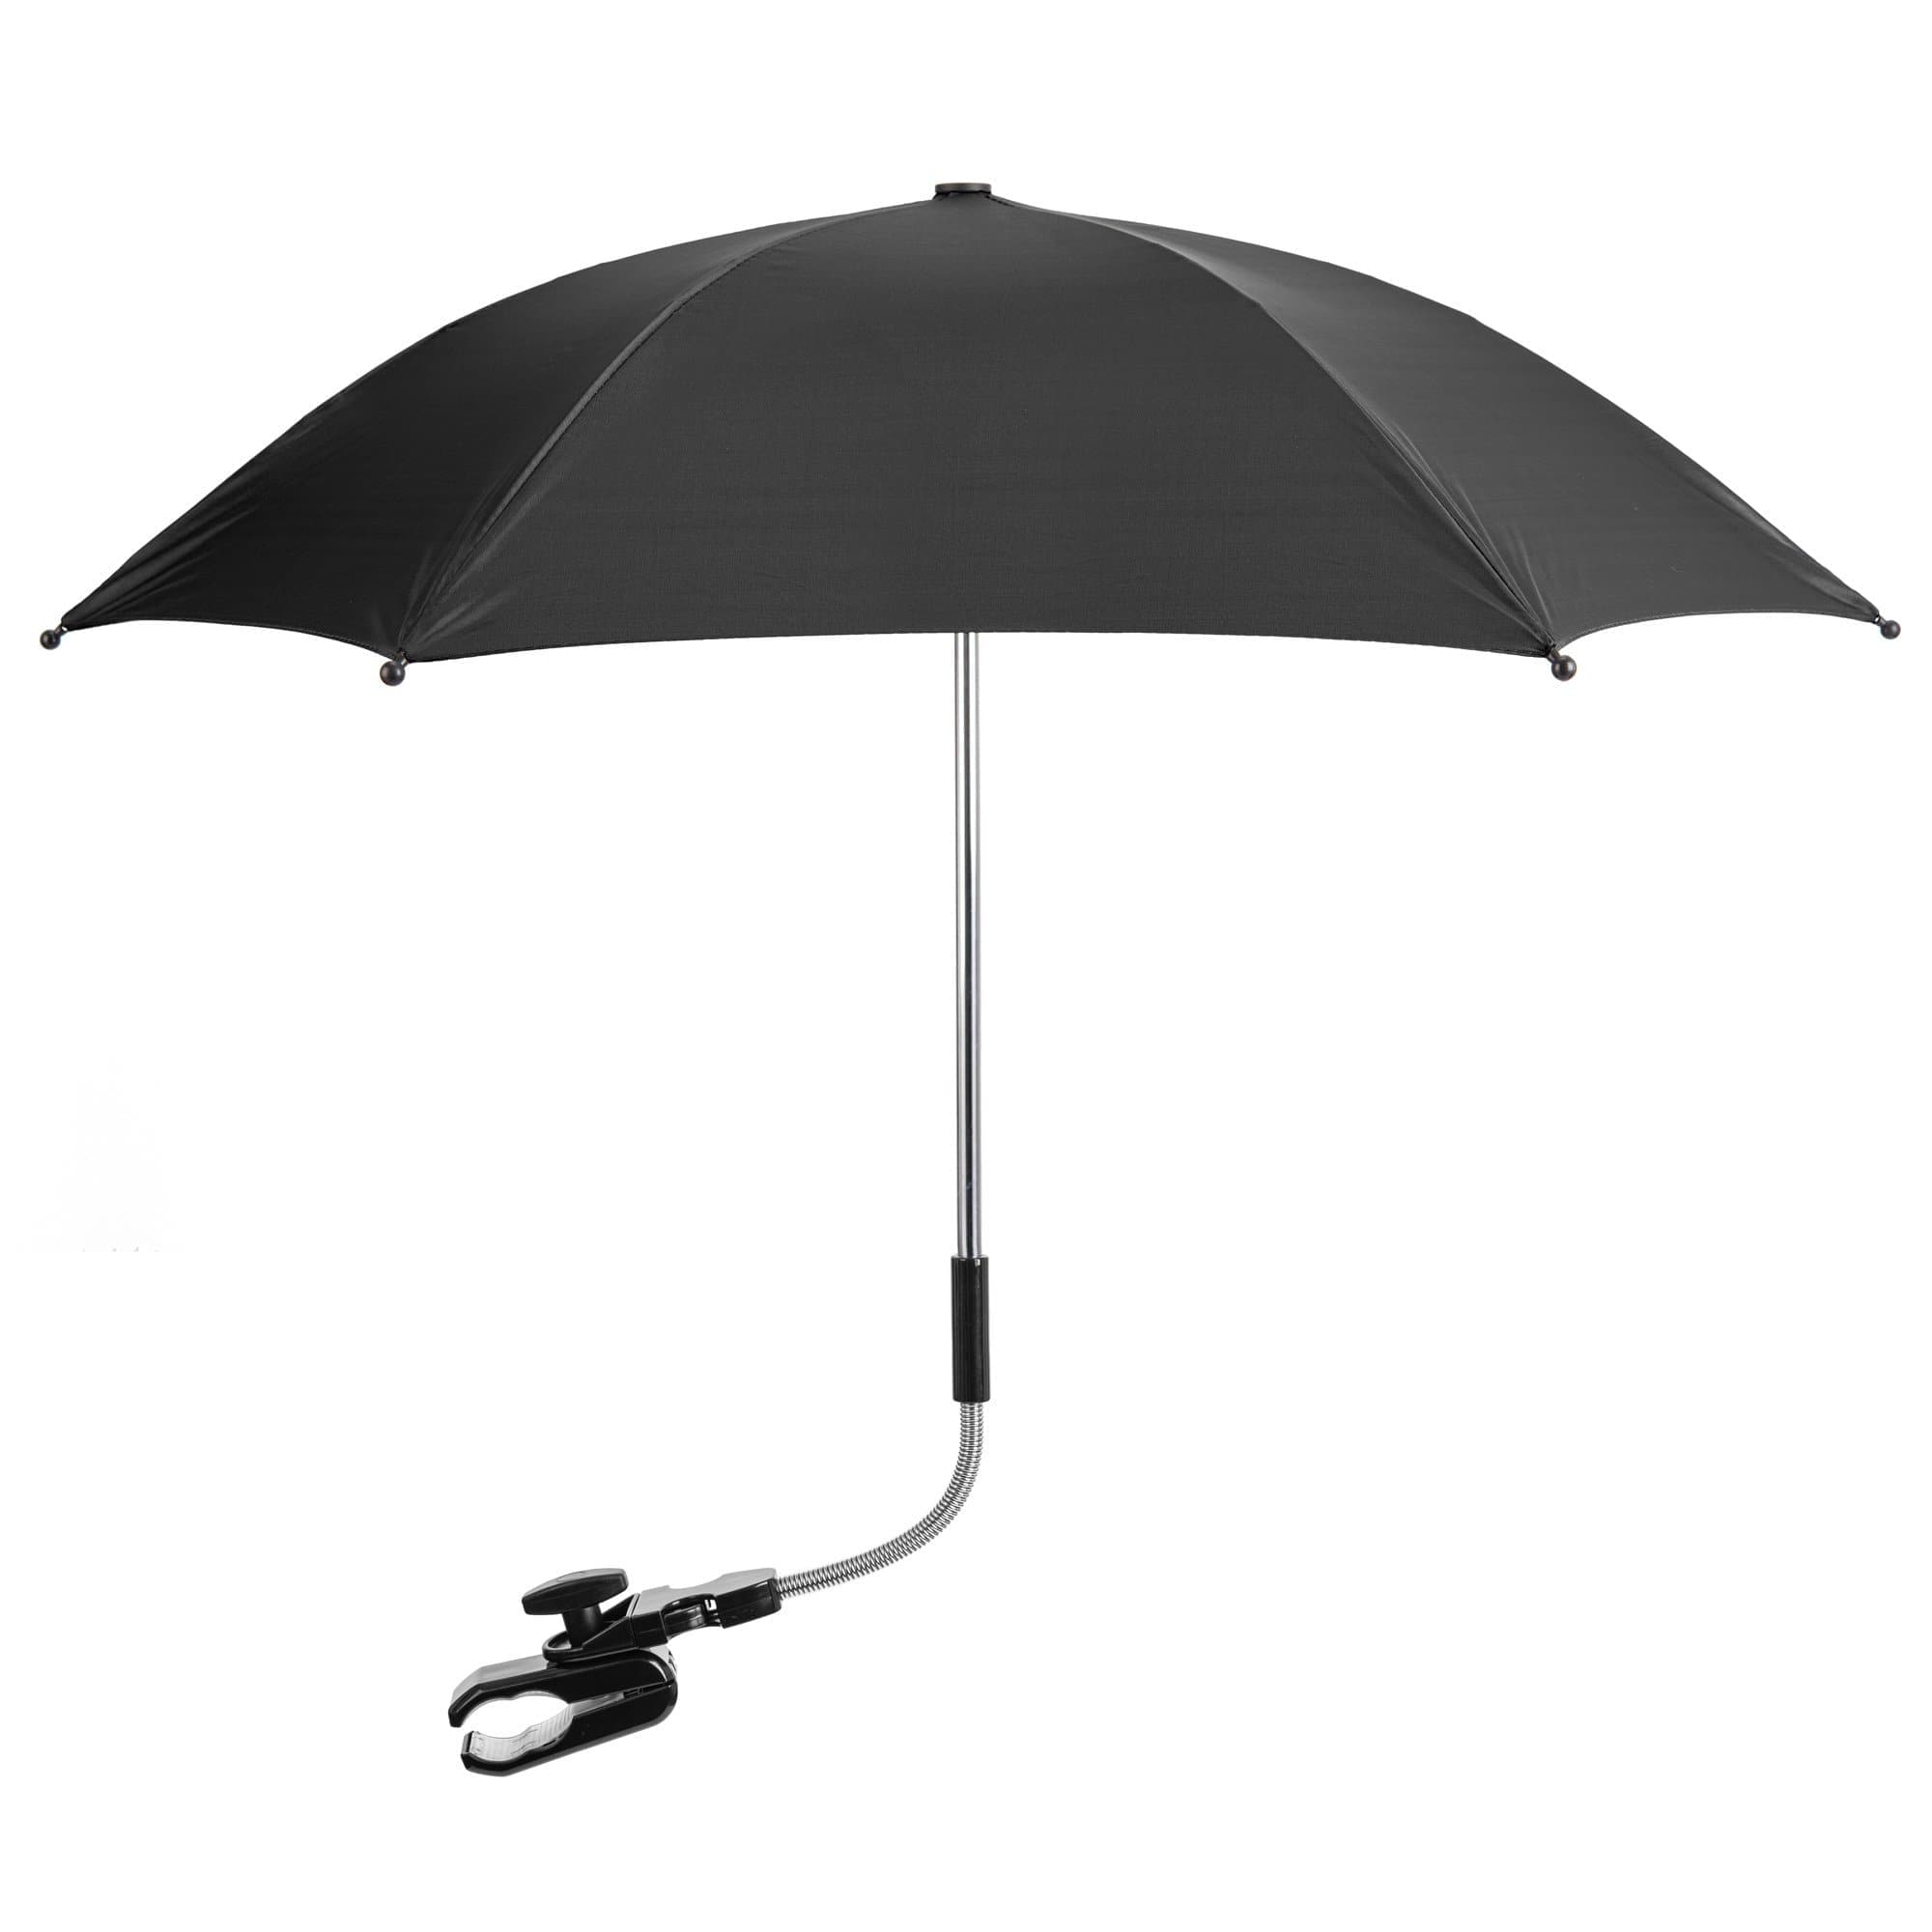 Baby Parasol Compatible With Uppababy - Fits All Models - For Your Little One